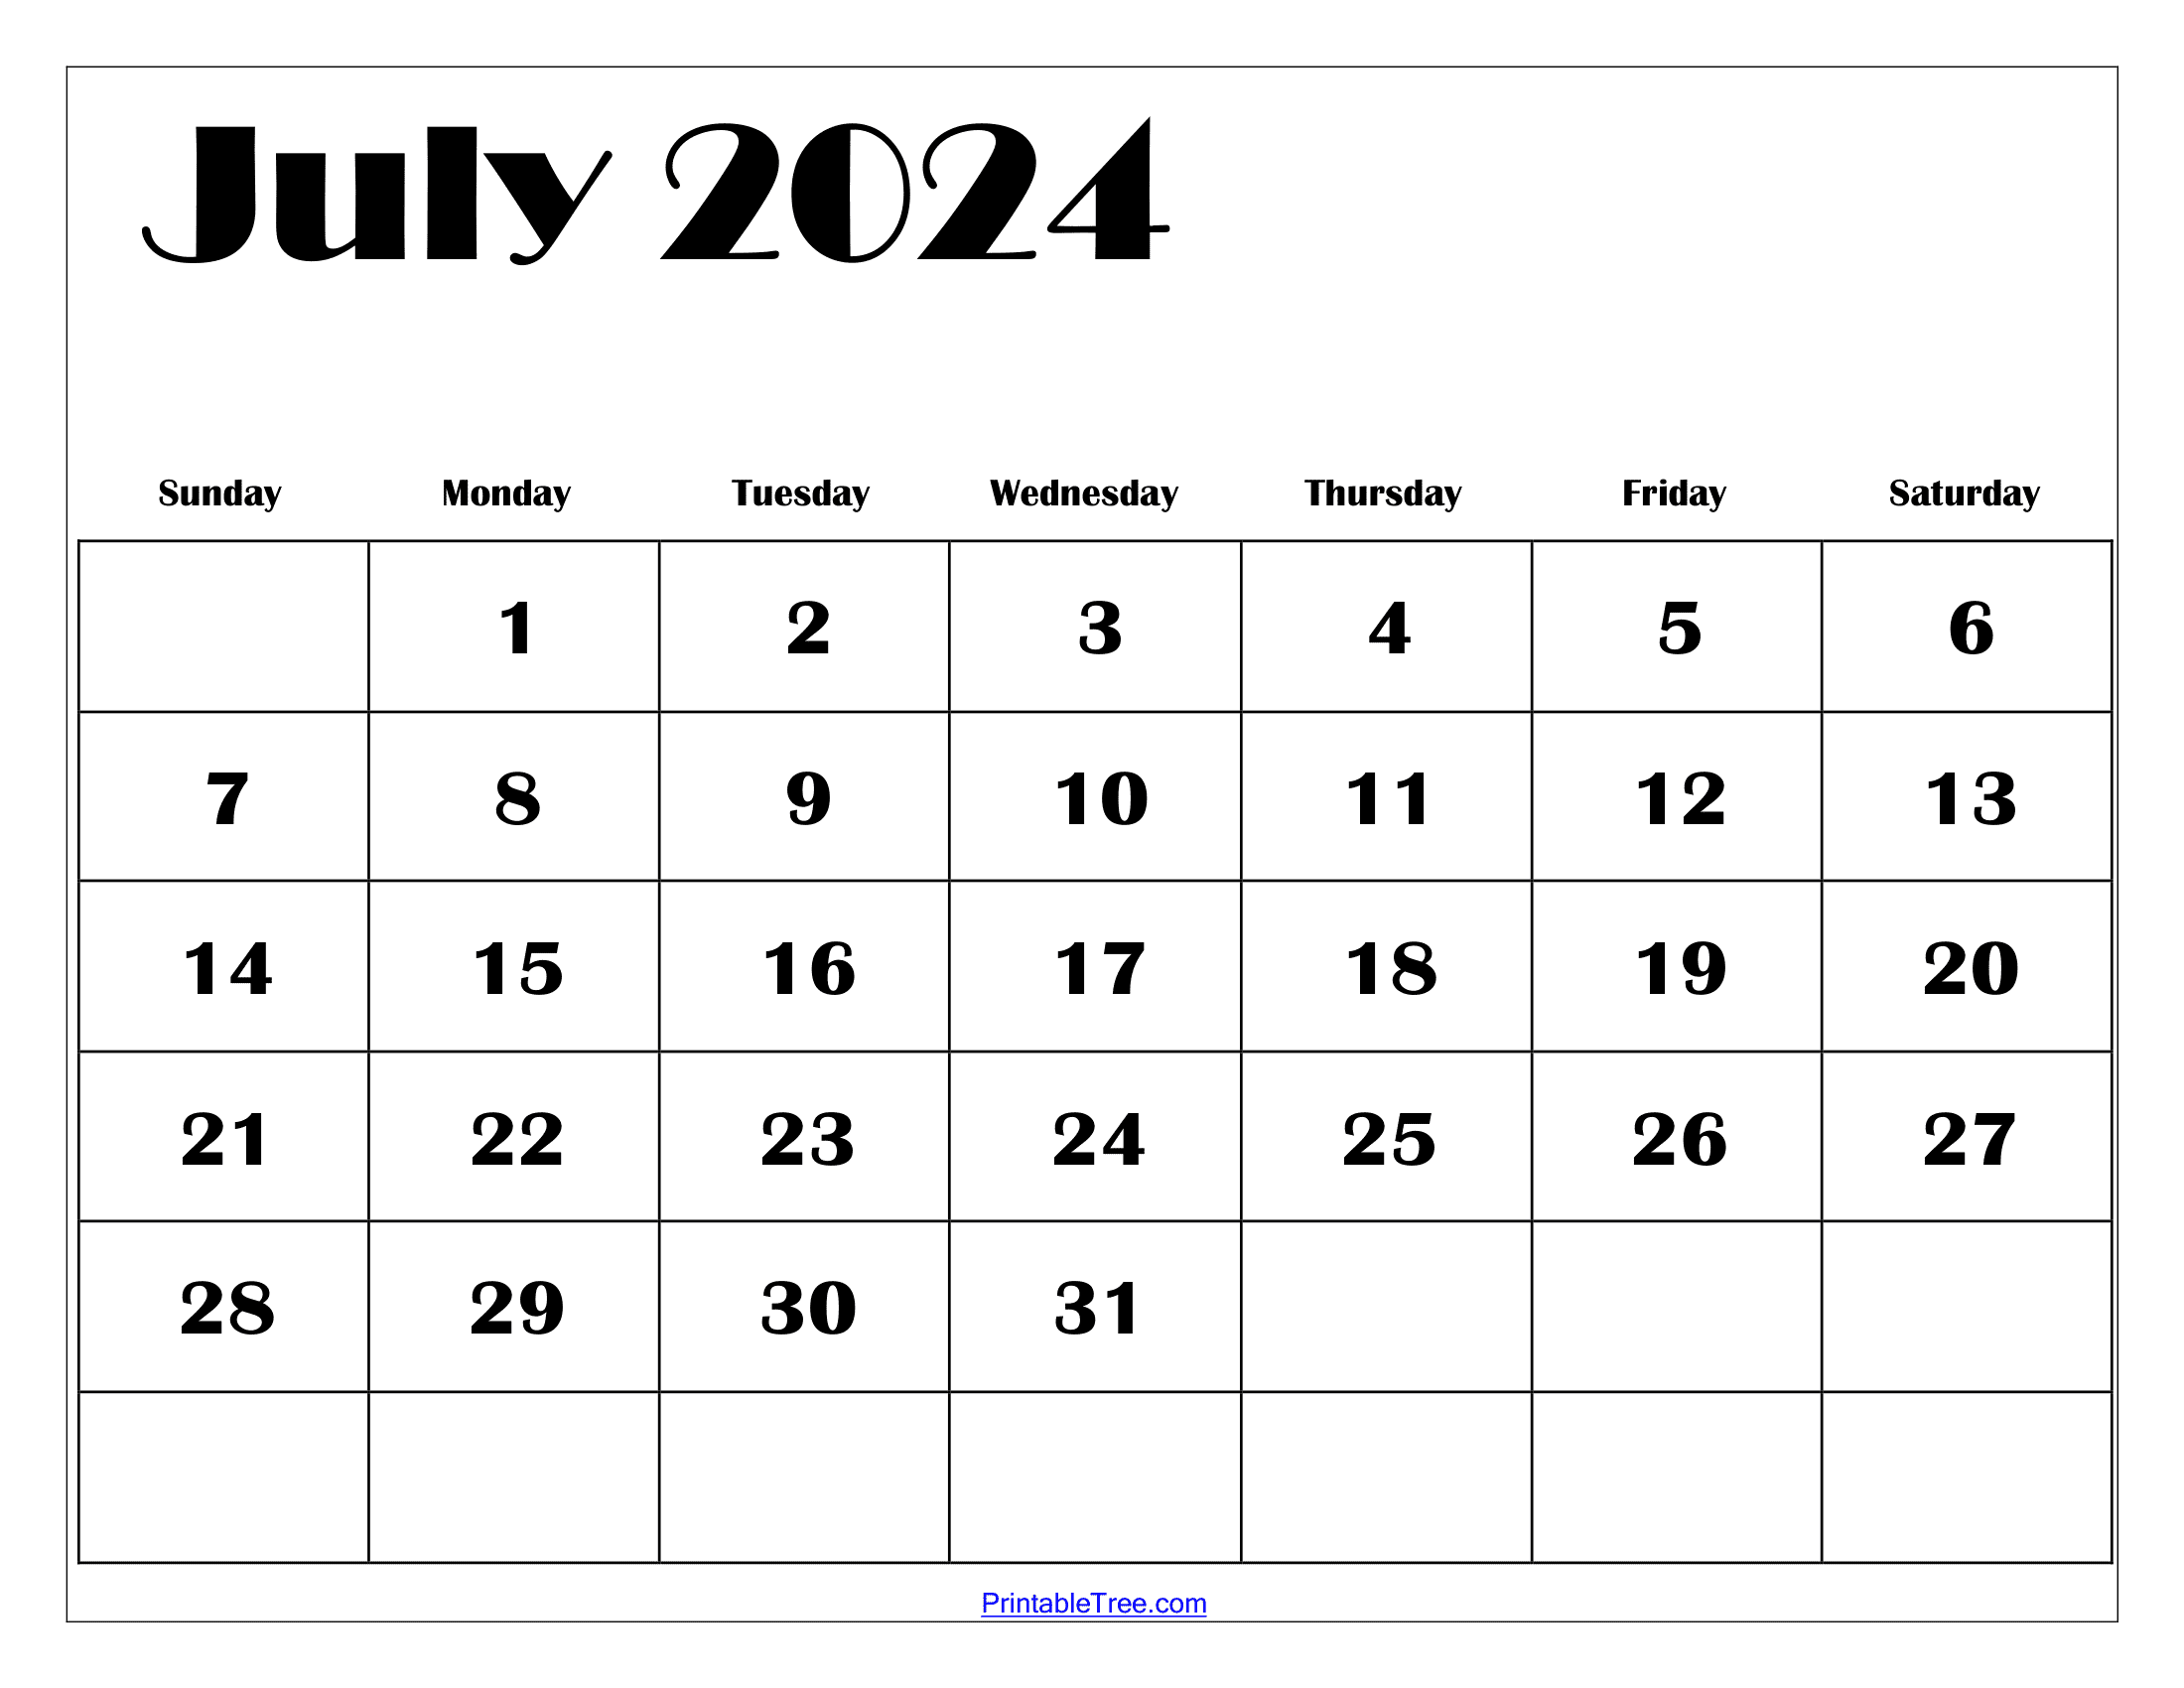 July 2024 Calendar Printable Pdf With Holidays Free Template for June July Printable Calendar 2024